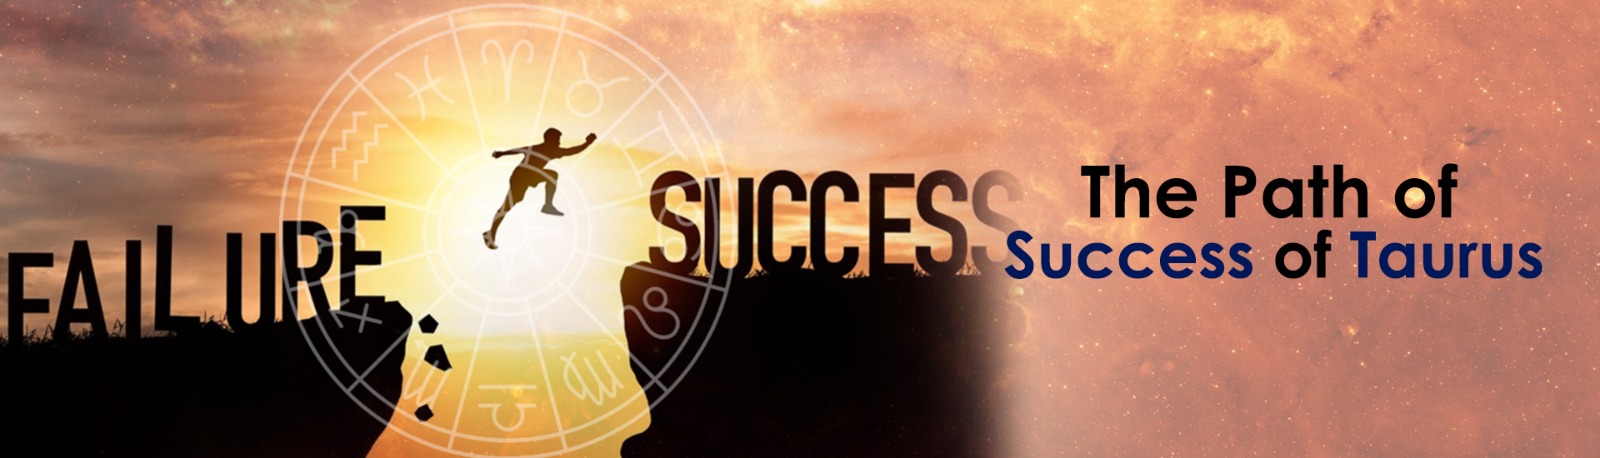 ACCORDING TO THE BEST ASTROLOGER IN INDIA THE PATH OF SUCCESS OF- TAURUS